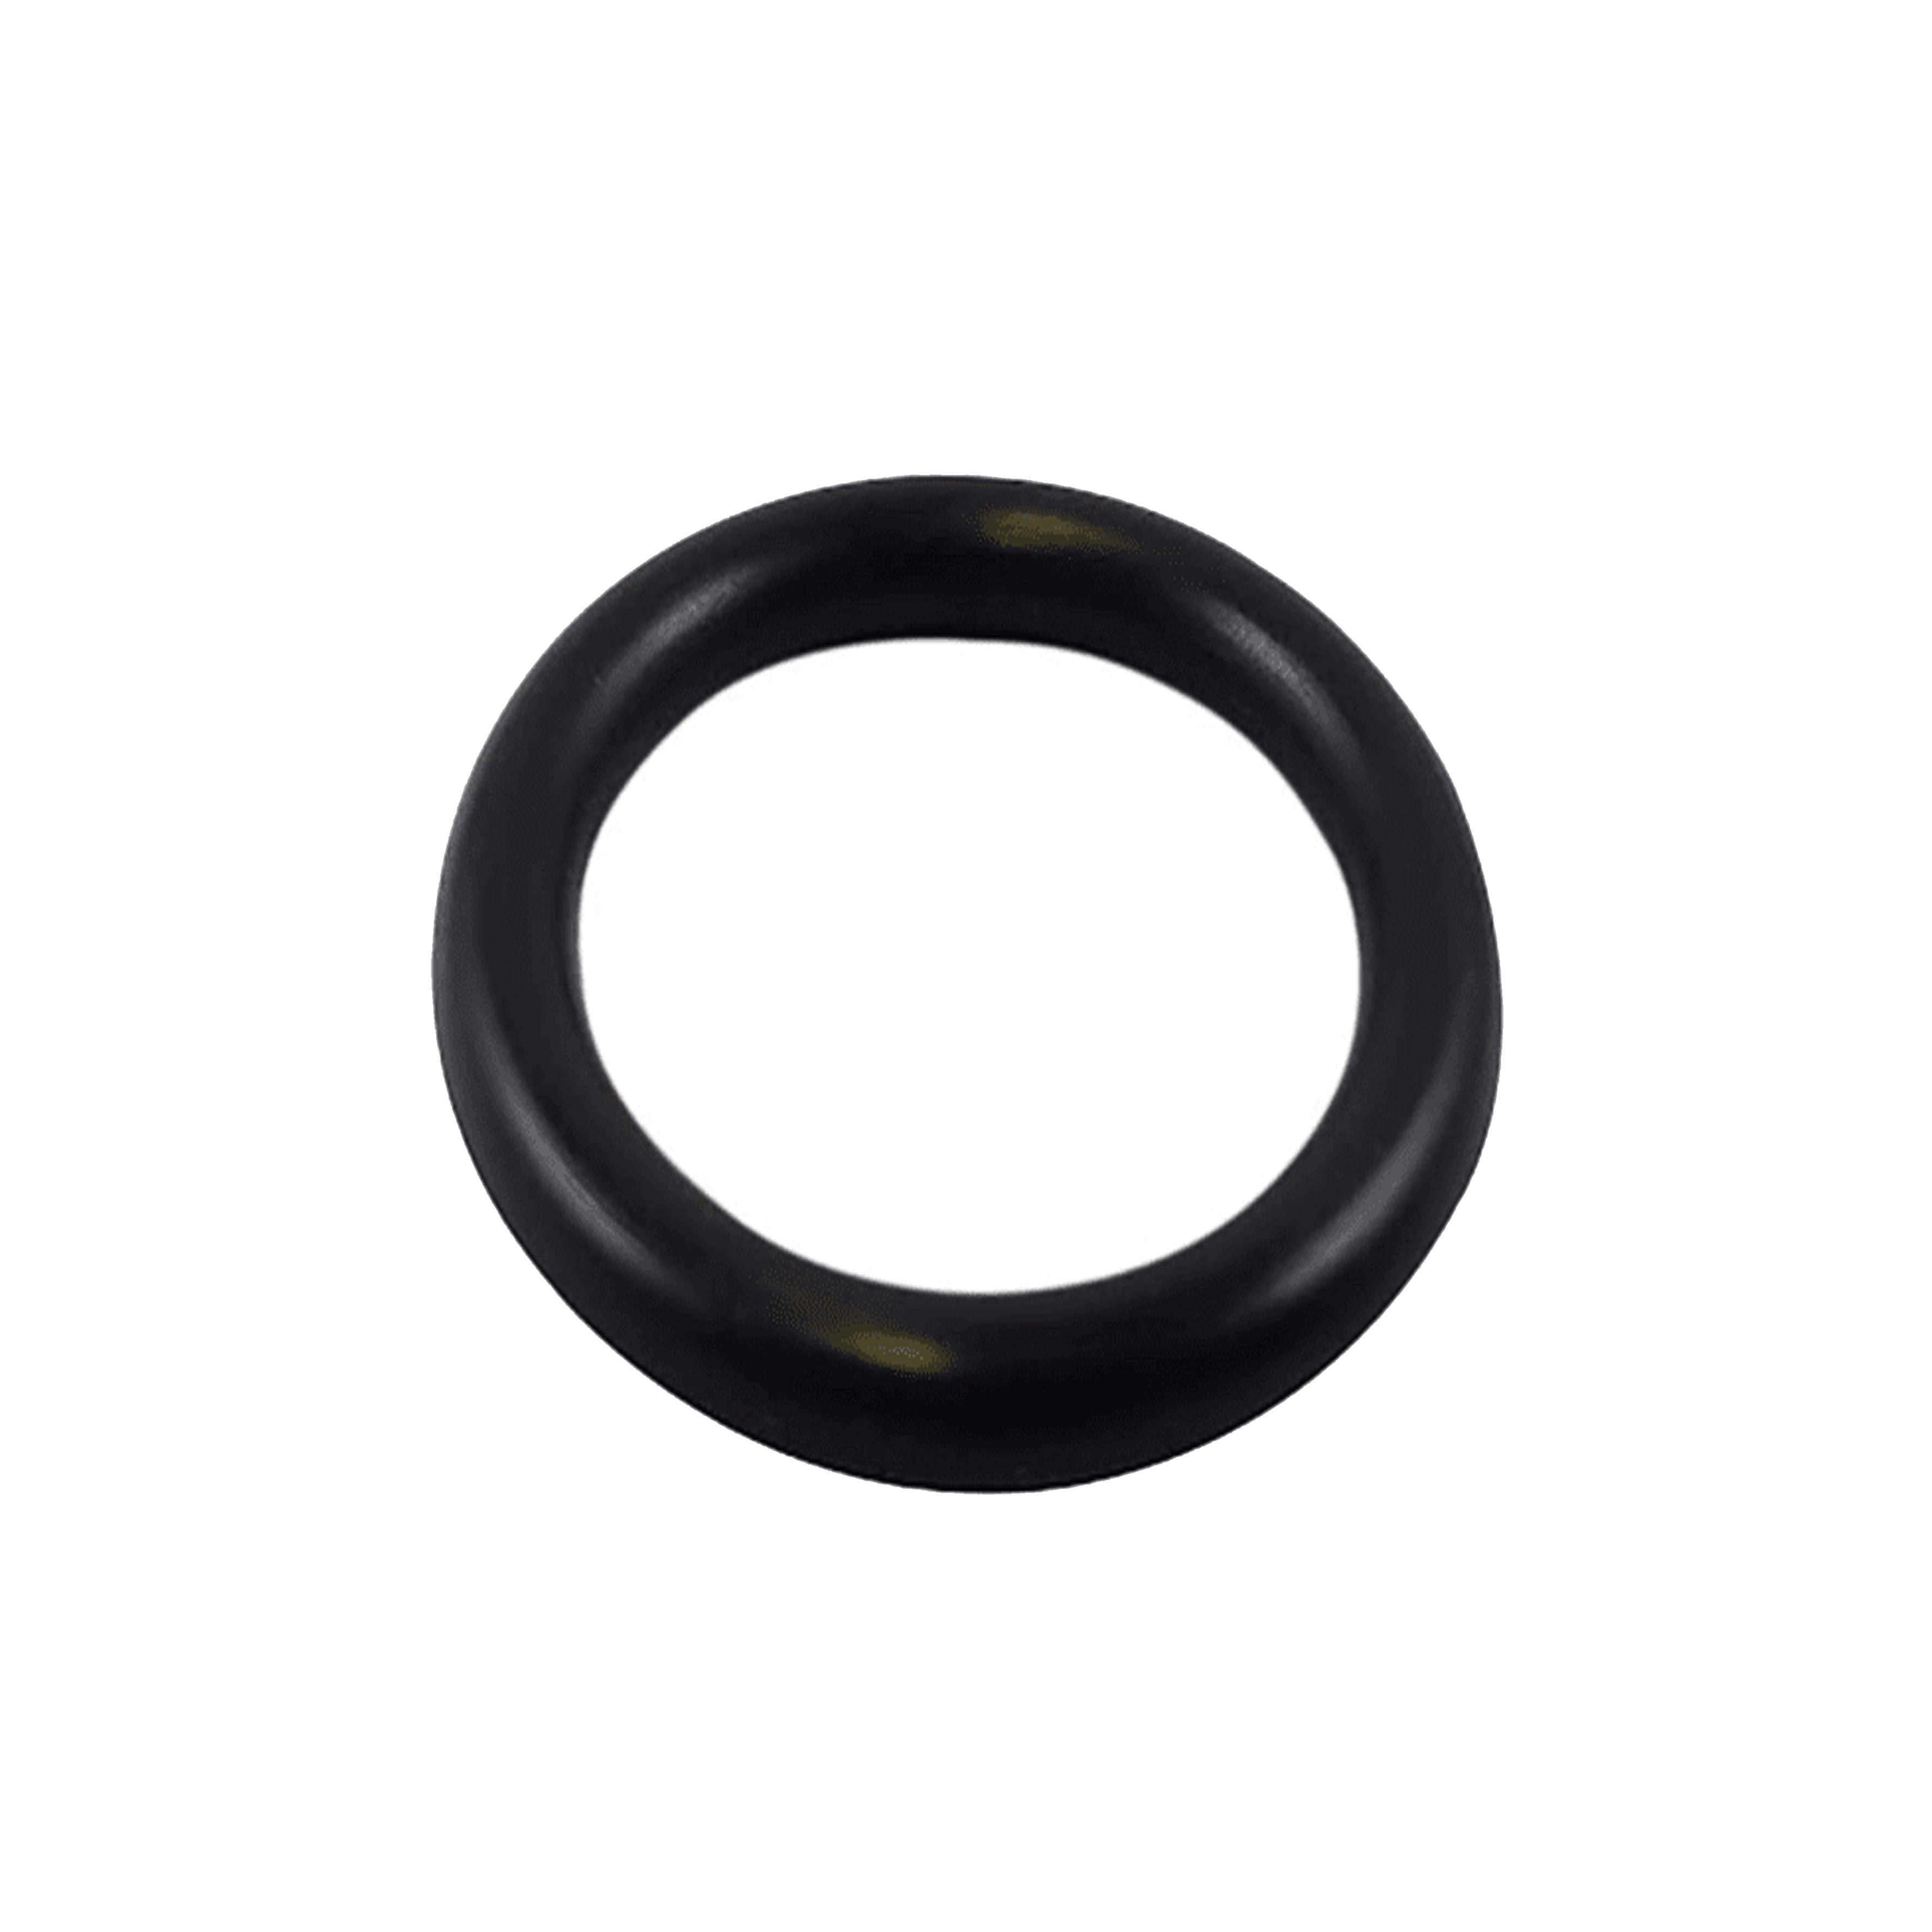 Replacement Vacuum O-ring for VacMaxx Kit